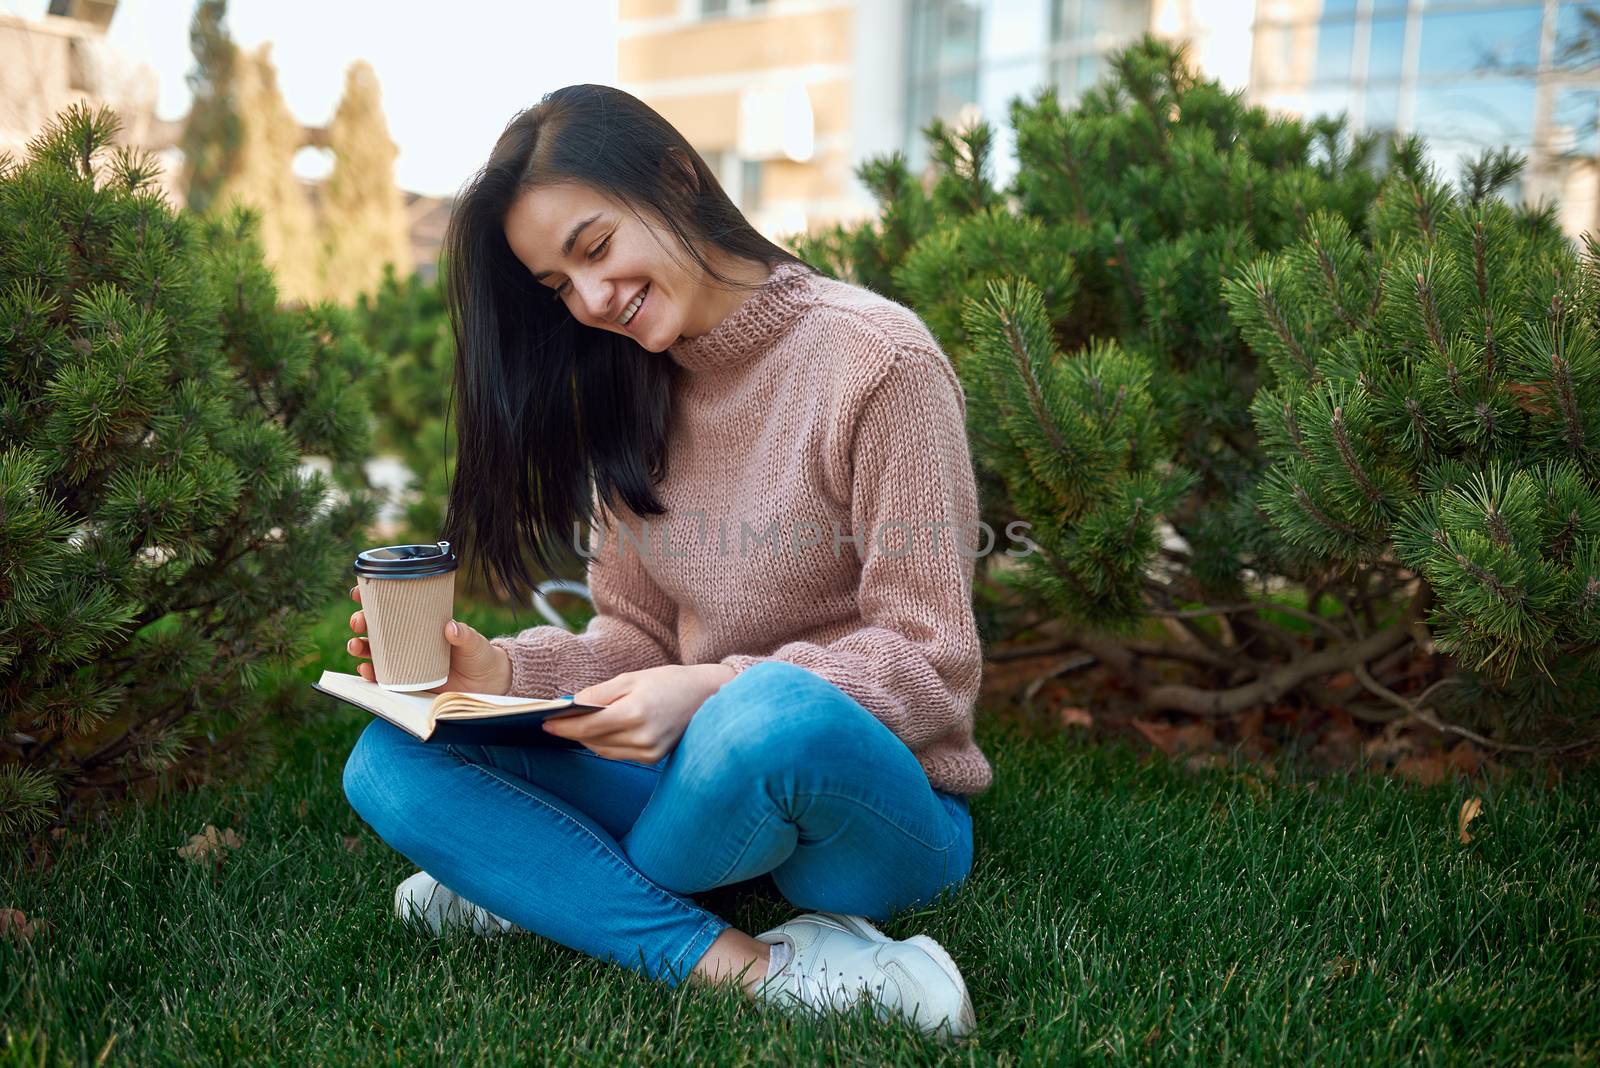 Pretty female smiling while reading interesting book outdoors by monakoartstudio